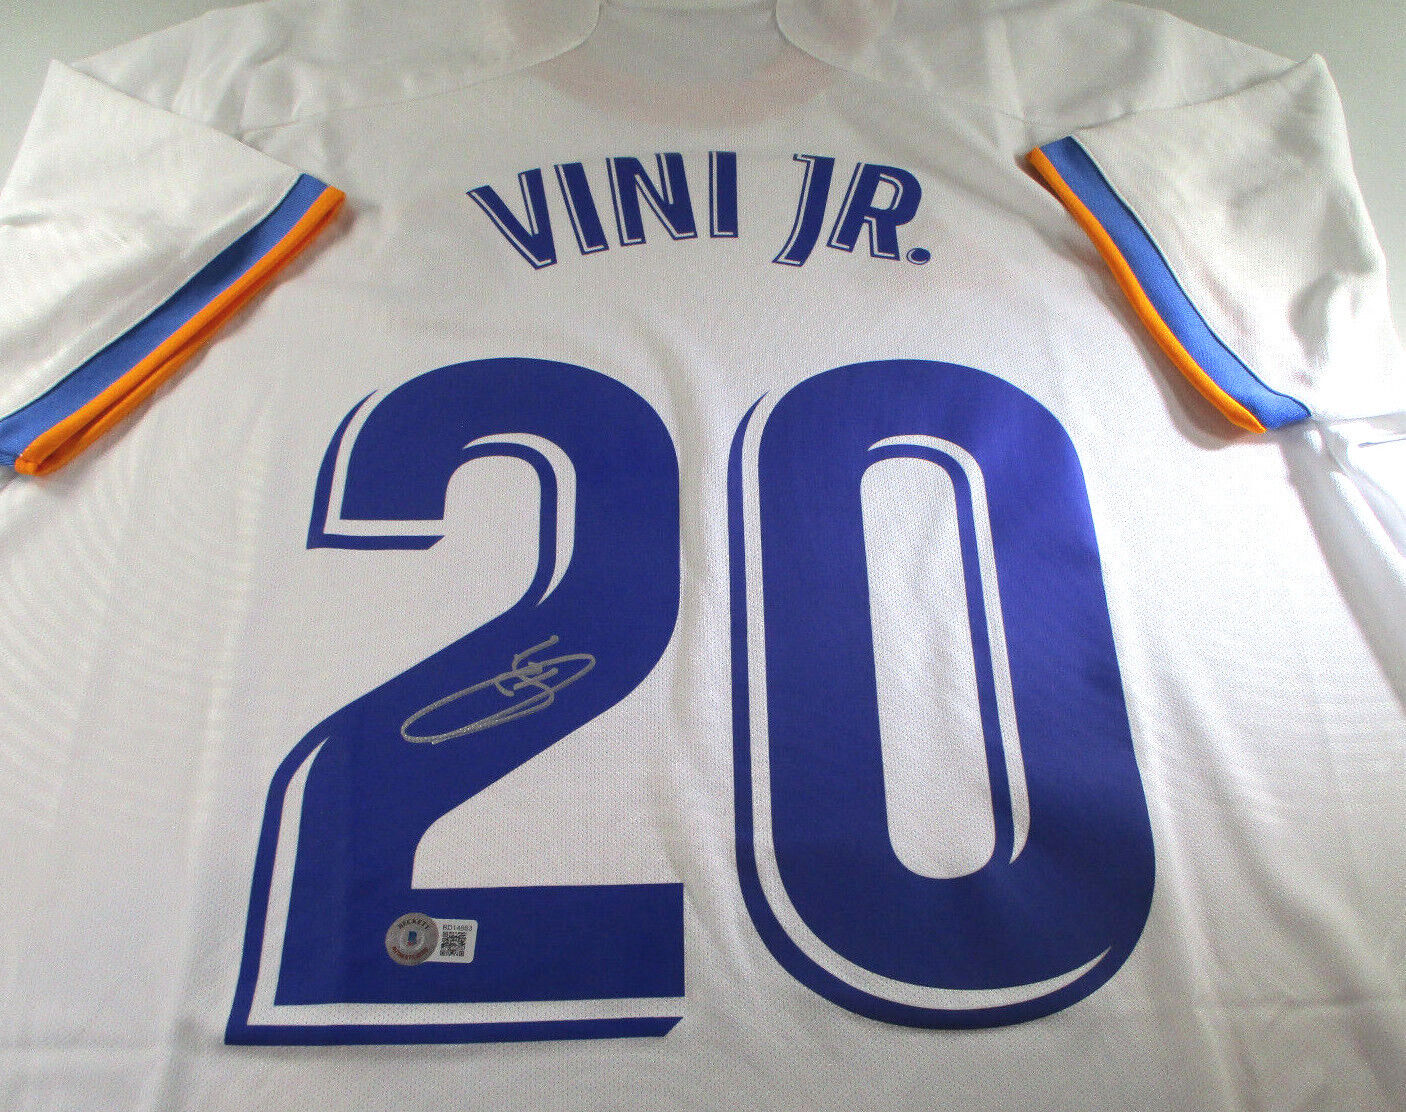 Vinicius Jr. / Autographed Real Madrid White Pro Style Soccer Jersey / Beckett